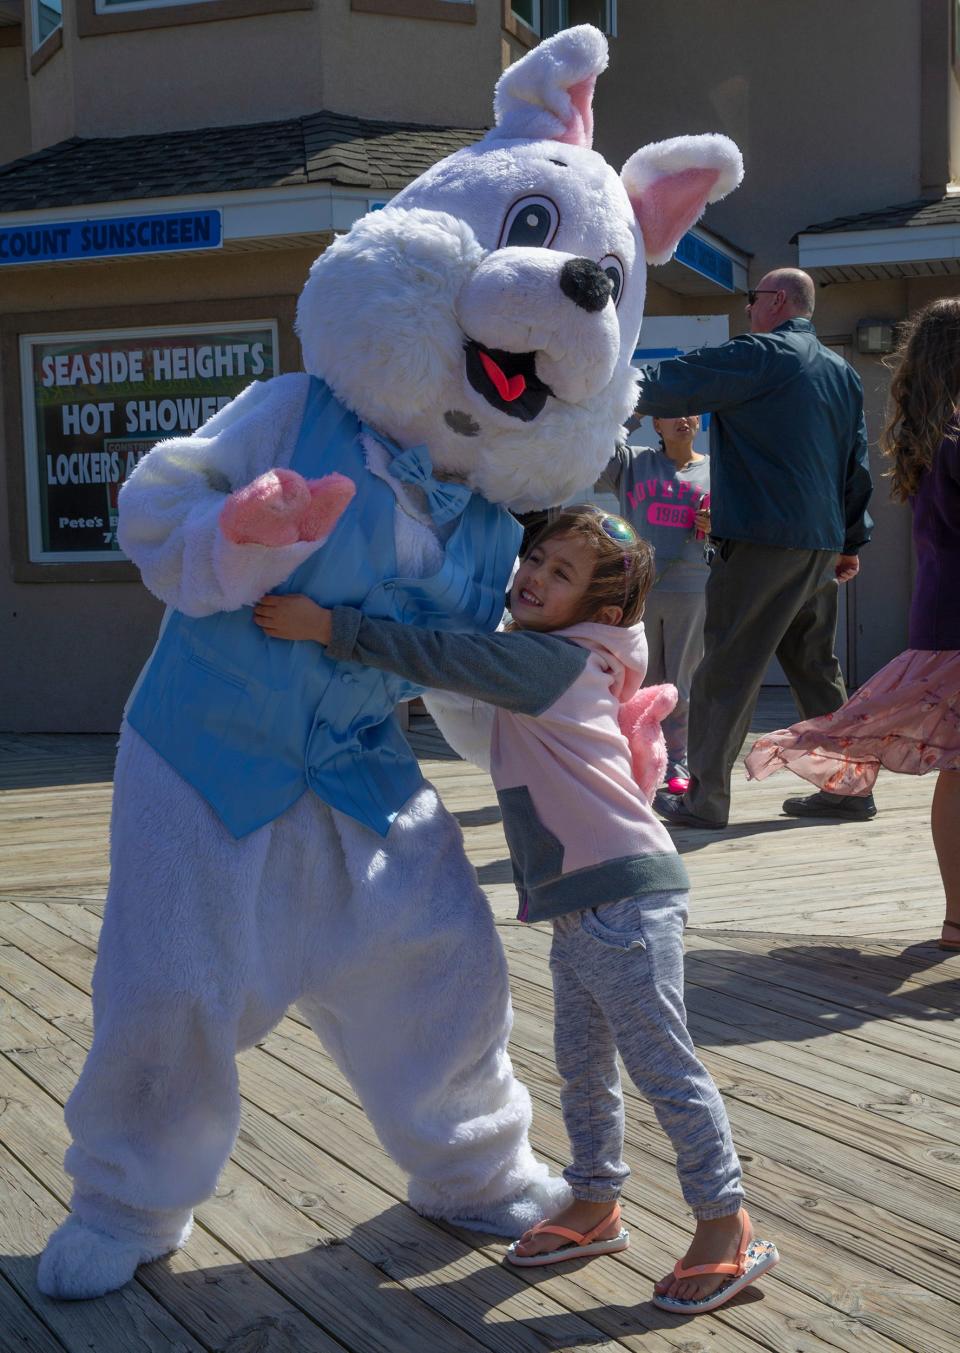 Ava Weber,3, of Island Heights hugs the Easter bunny during a visit to the boardwalk. Easter on the boardwalk in Seaside Heights Easter Parade where Mayor Anthony Vaz and council members will gave out spring flowers to the people who came out to enjoy the day. There was a judging later in the day for best Easter outfits. 